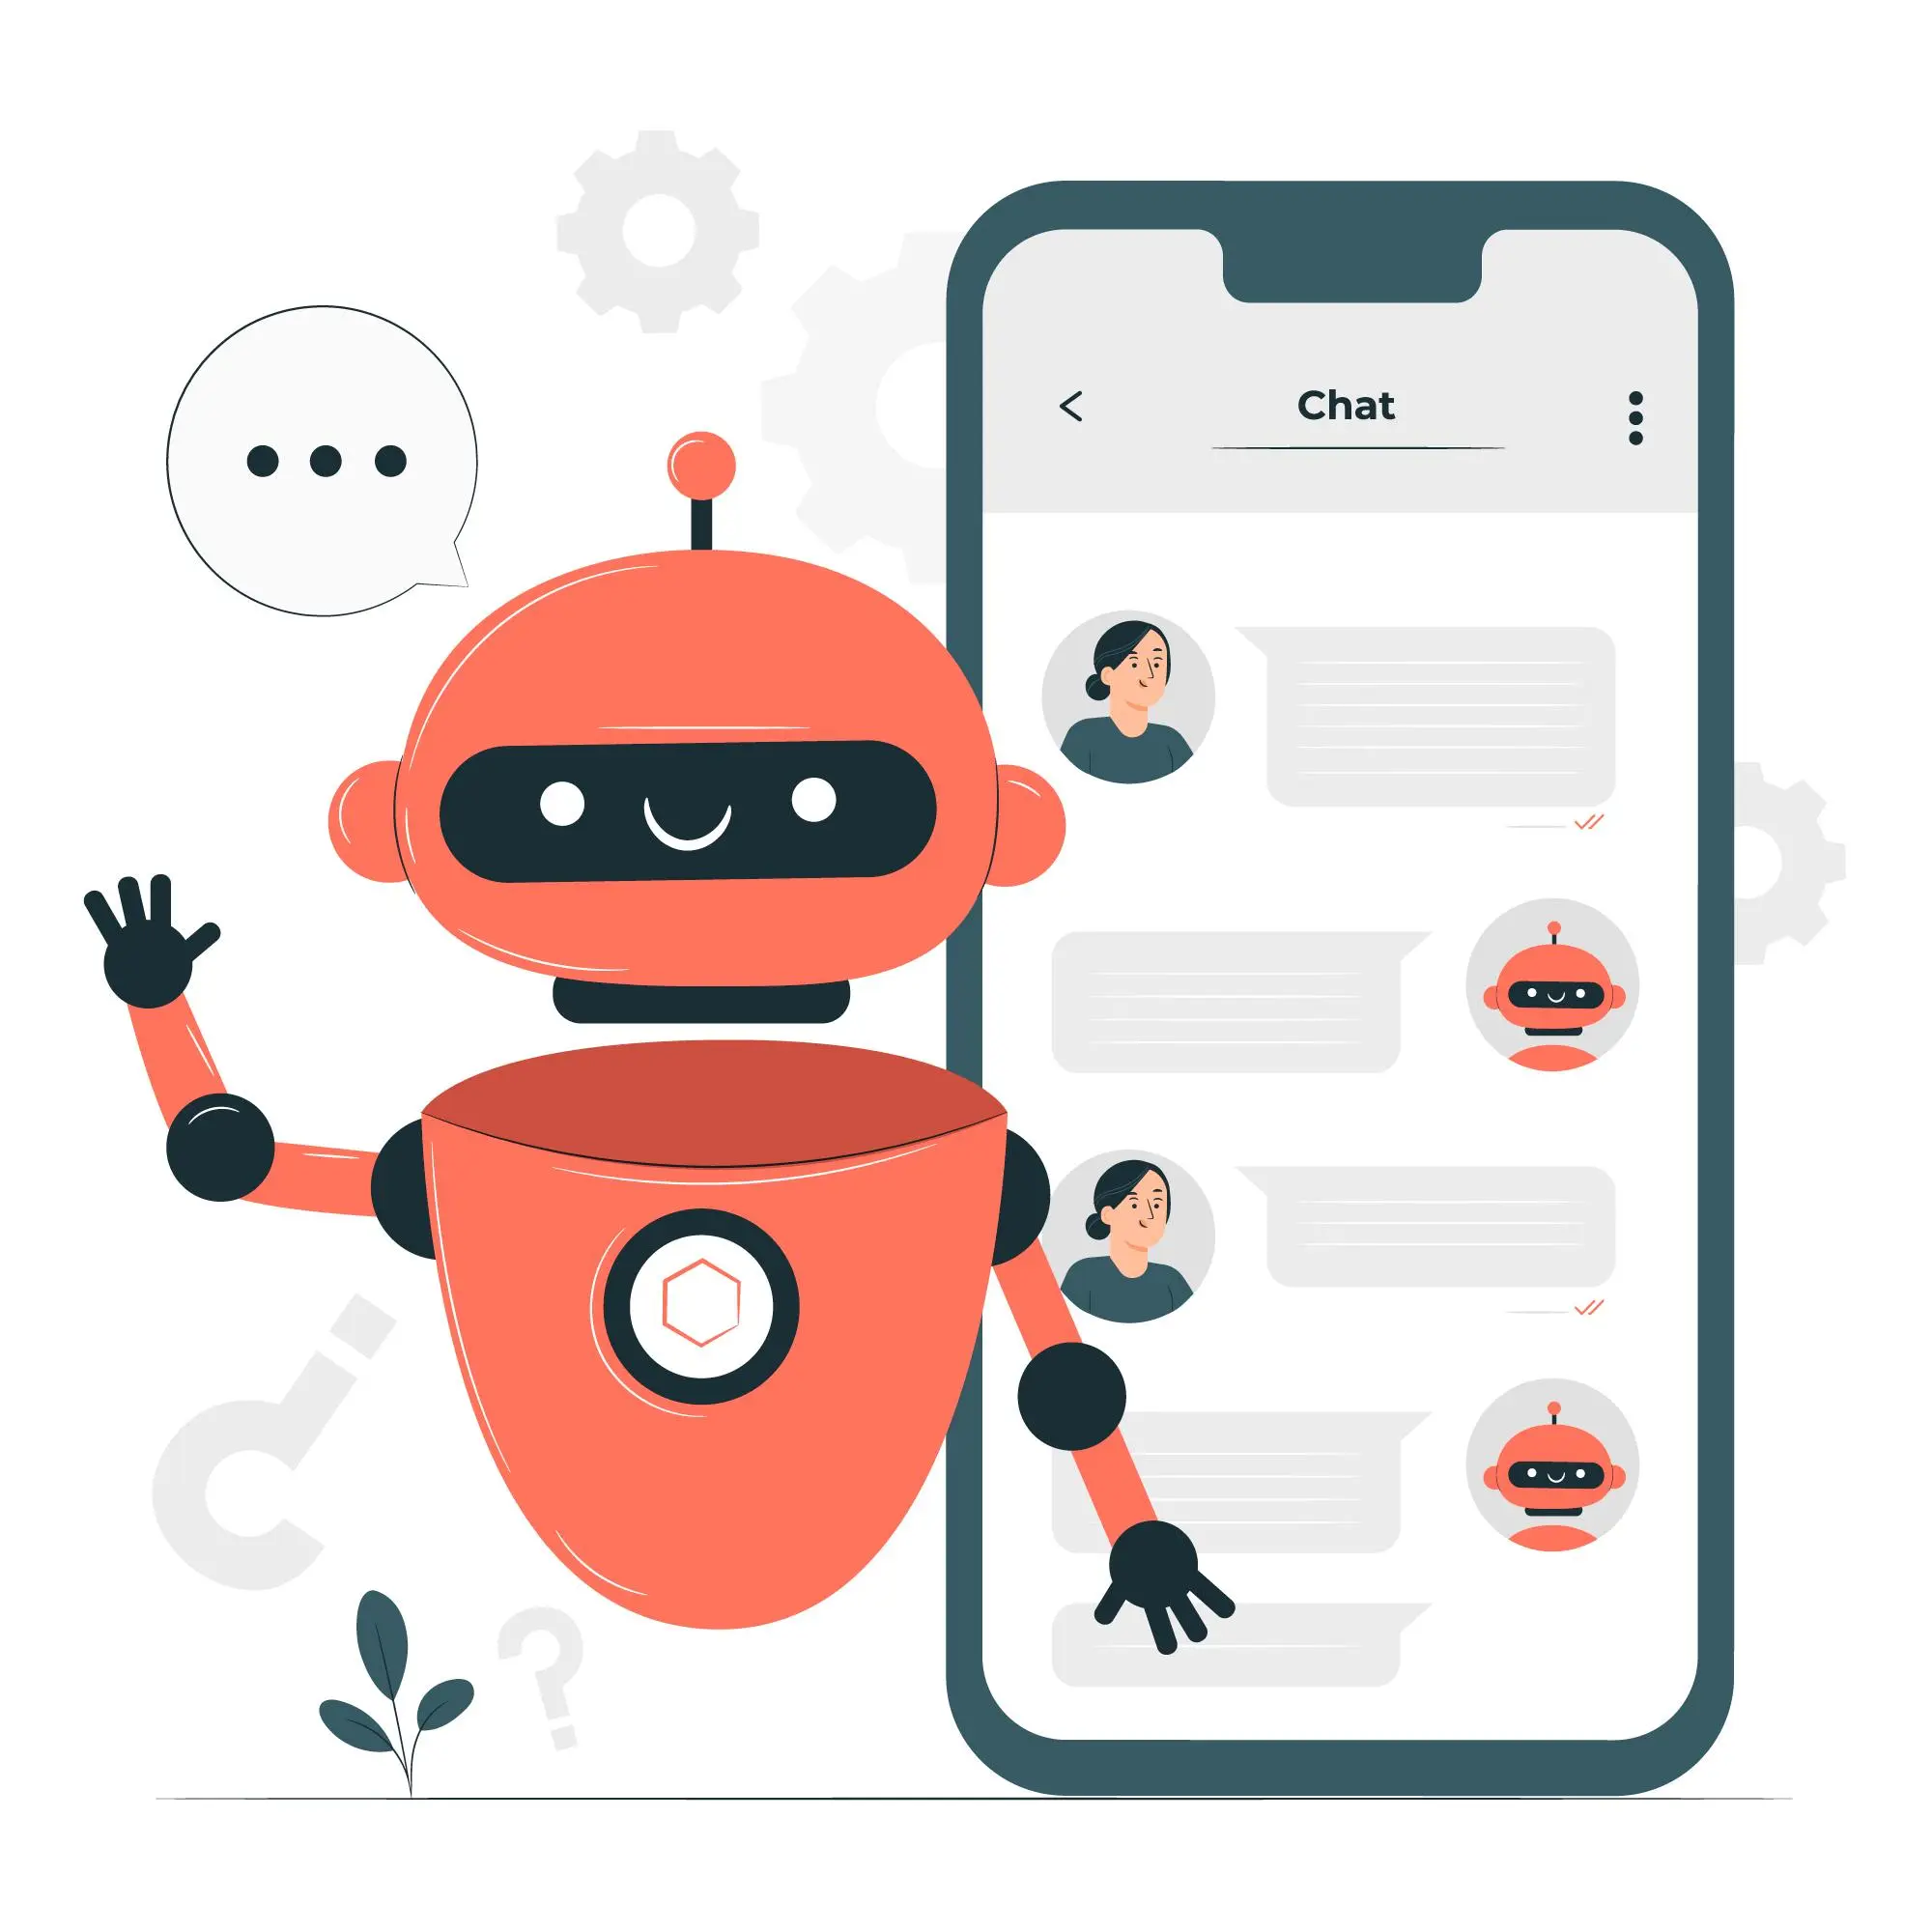 An AI chatbot is responding to the customer request